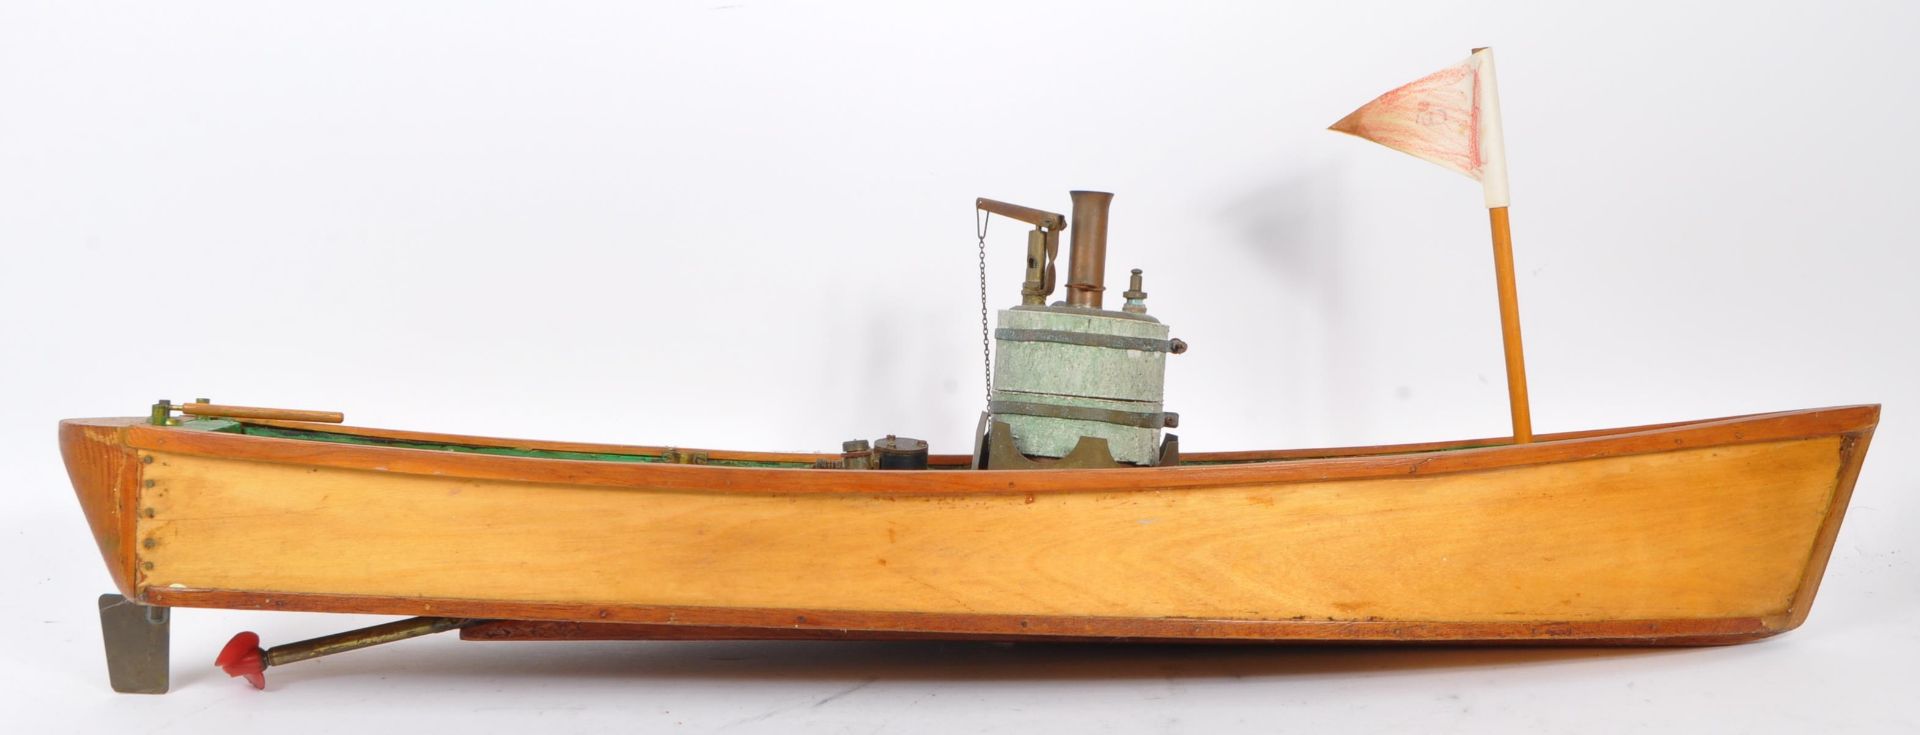 VINTAGE 20TH CENTURY SCRATCH BUILT POND YACHT / BOAT - Image 4 of 6